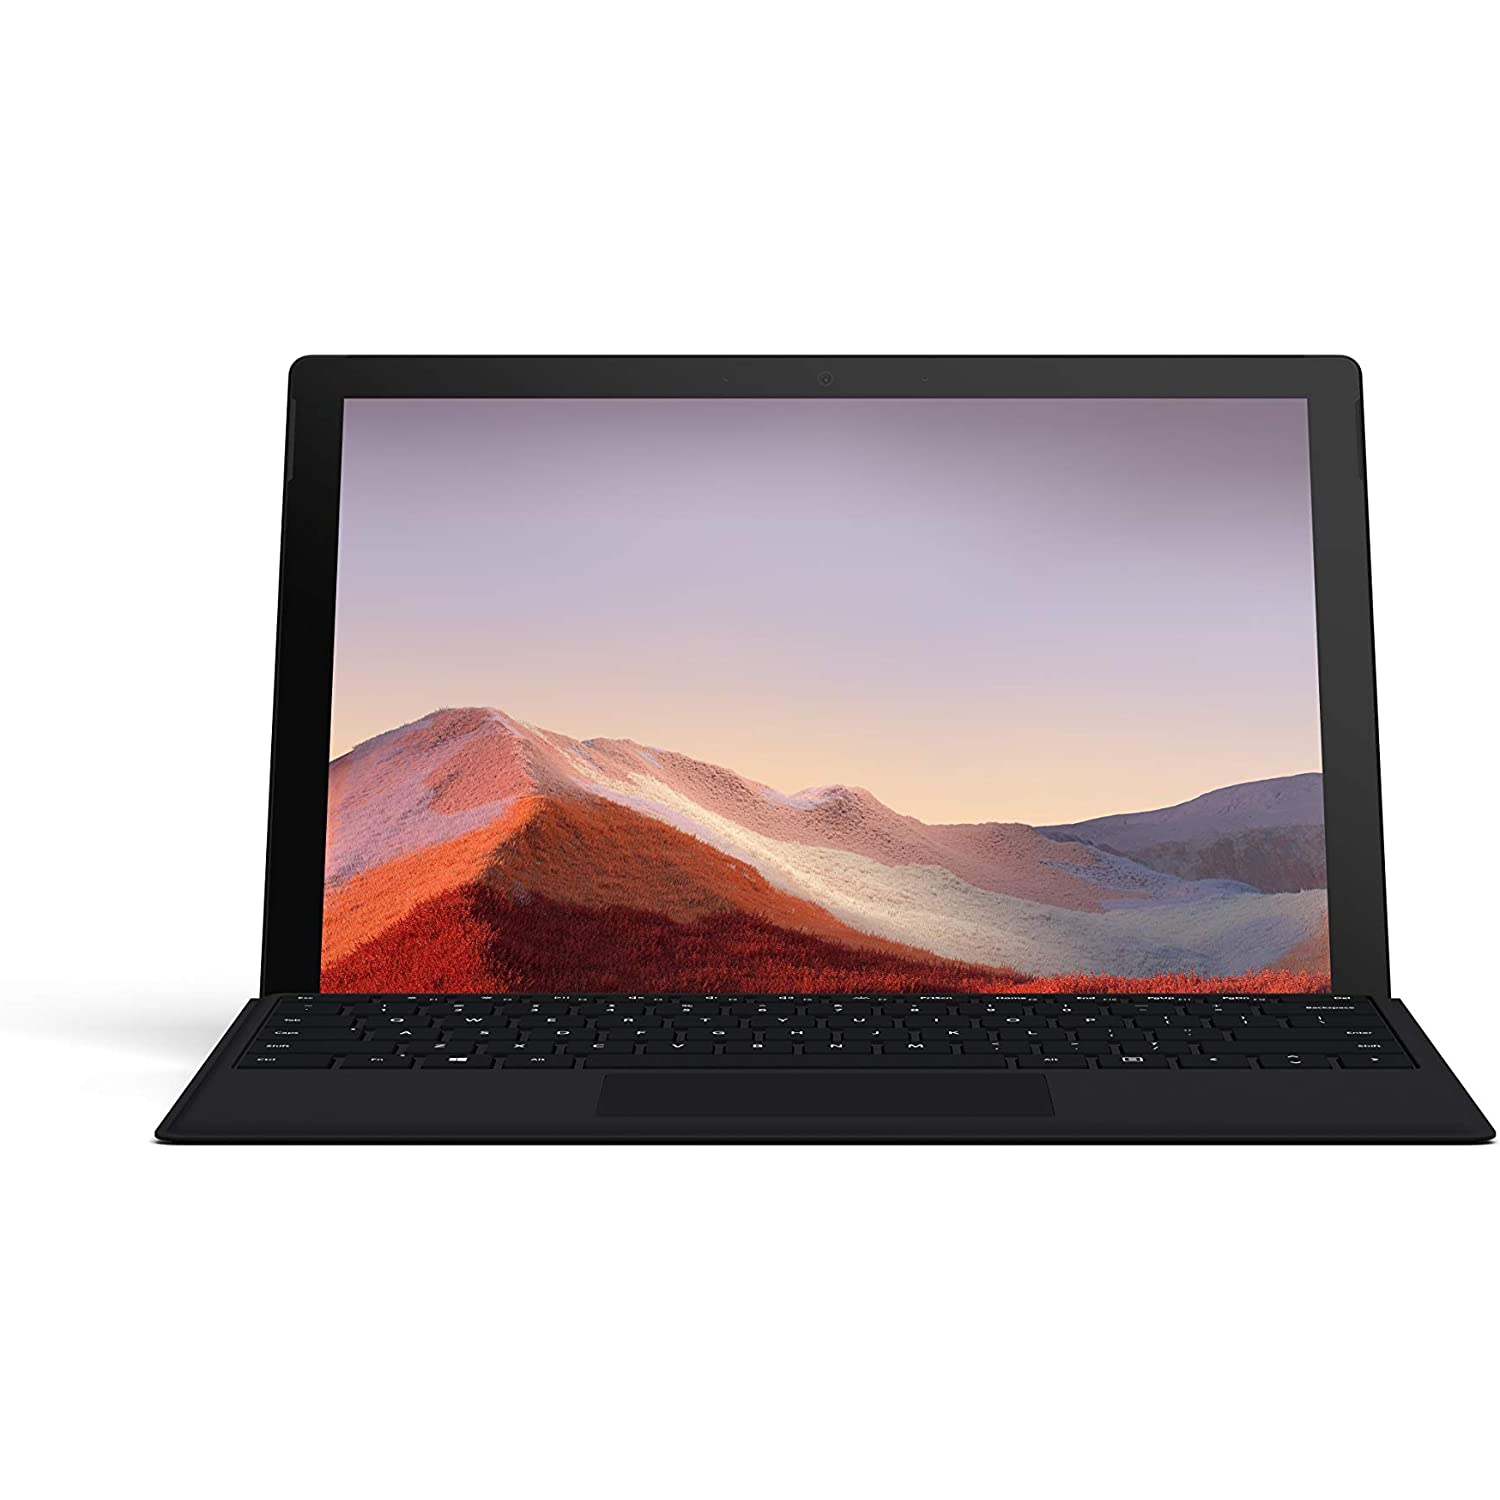 Refurbished (Excellent) - Microsoft Surface Pro 7+ 12.3" (Model 1960), Intel Core i7-11th Gen. 2.8GHz, 16GB, 256GB Stroage, Windows 11 Pro. (With Keyboard)